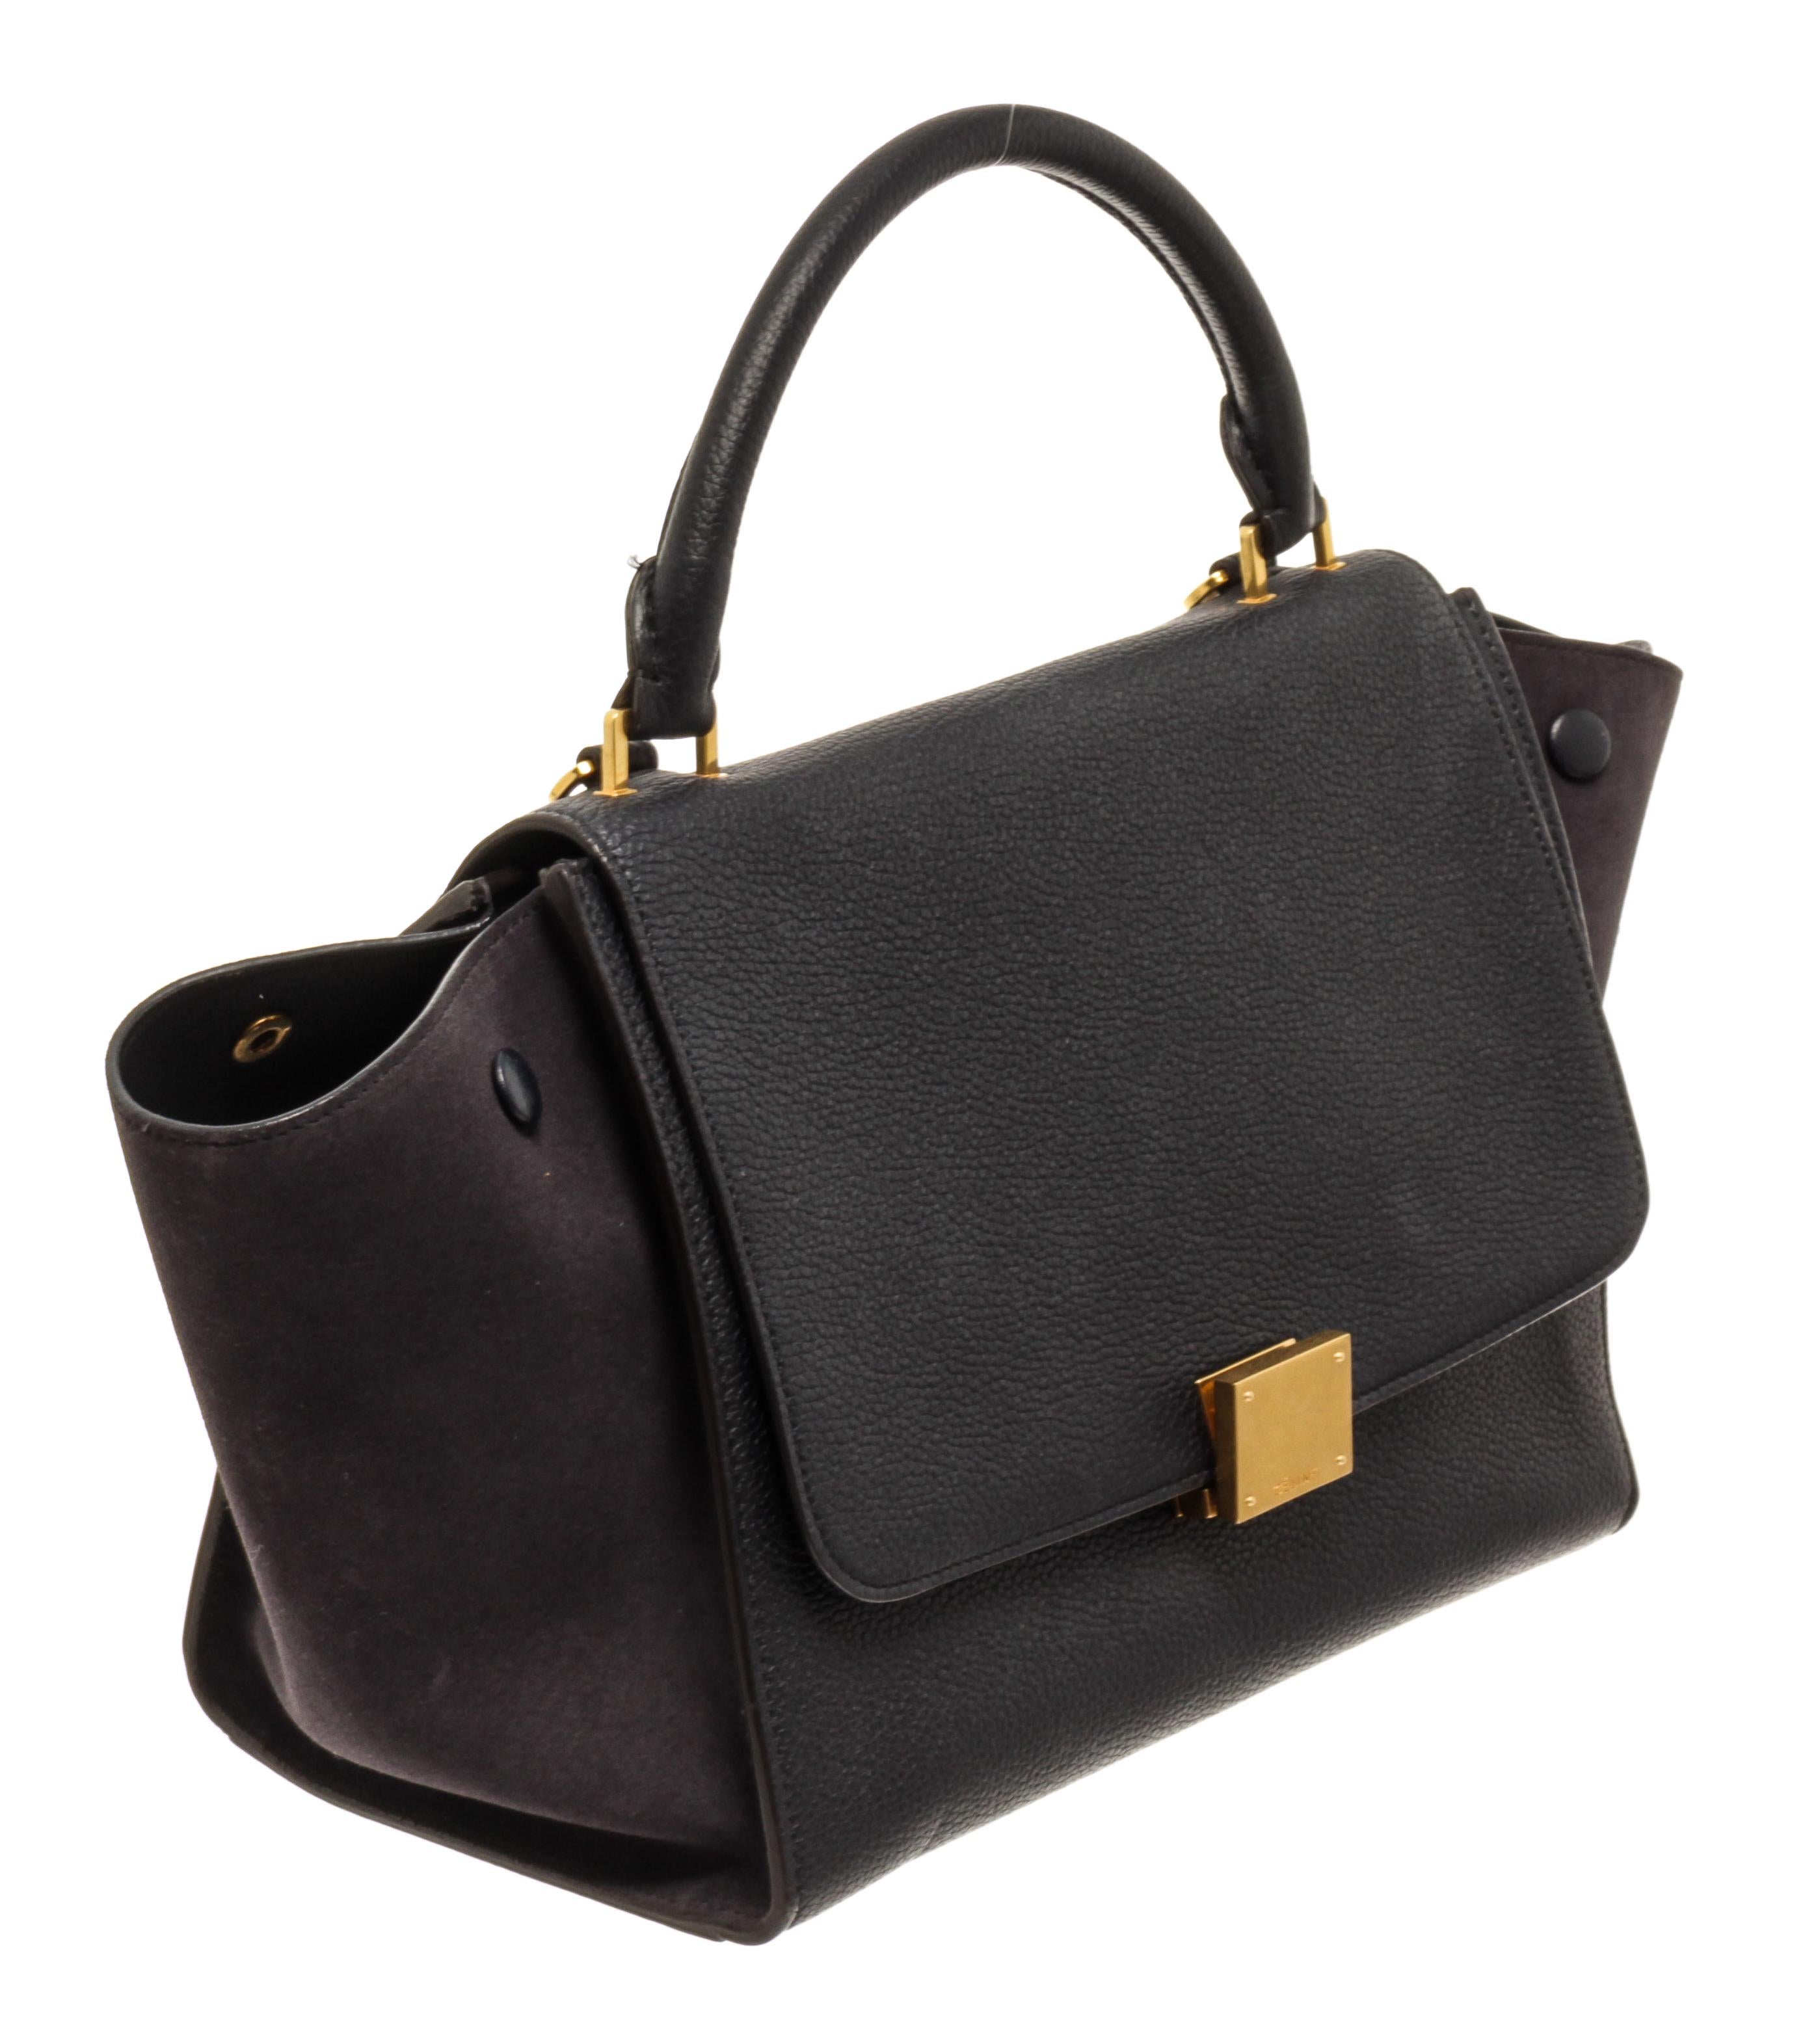 Celine by Phoebe Philo Black Leather Trapeze Bag with soft smooth leather, single rounded top handle, adjustable detachable shoulder strap, foldover top, flip-lock fastening.

80426MSC